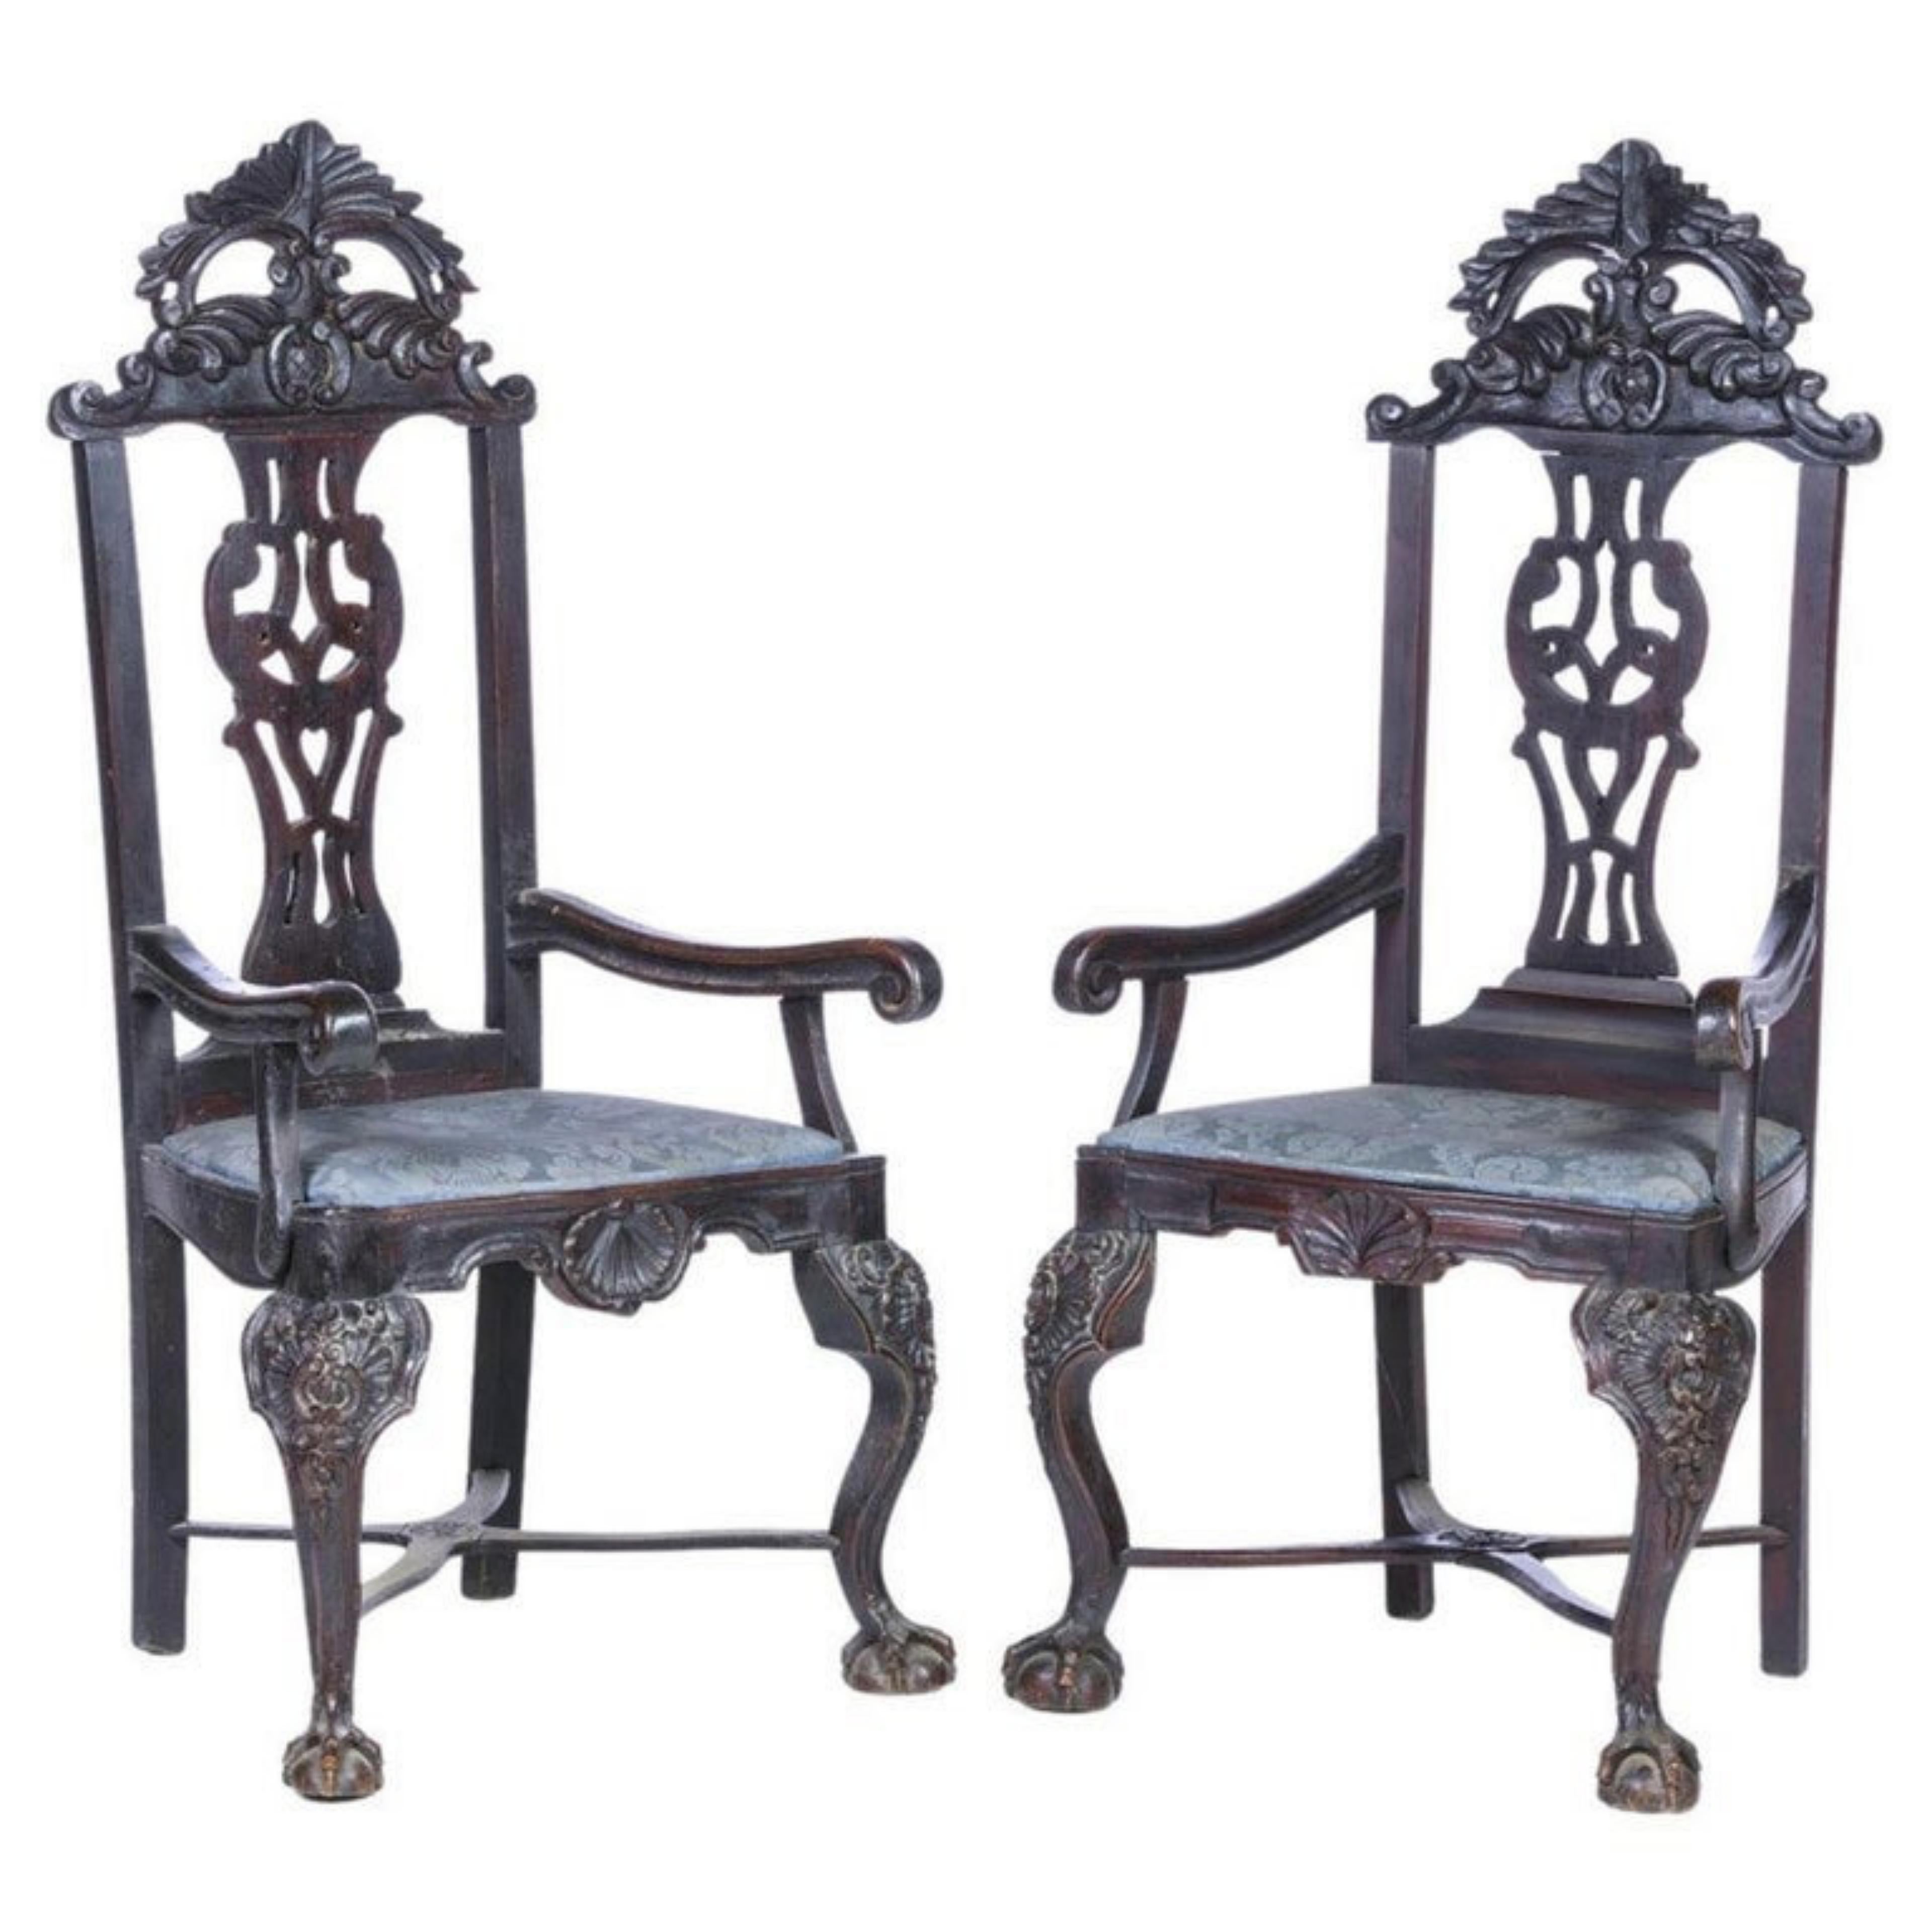 Pair of armchairs
Portuguese, 19th century, in carved chestnut wood. Open backrest, decorated with plant motifs, ending in claw feet and ball. Upholstered seats.
Dim.: 131 x 63 x 46 cm.